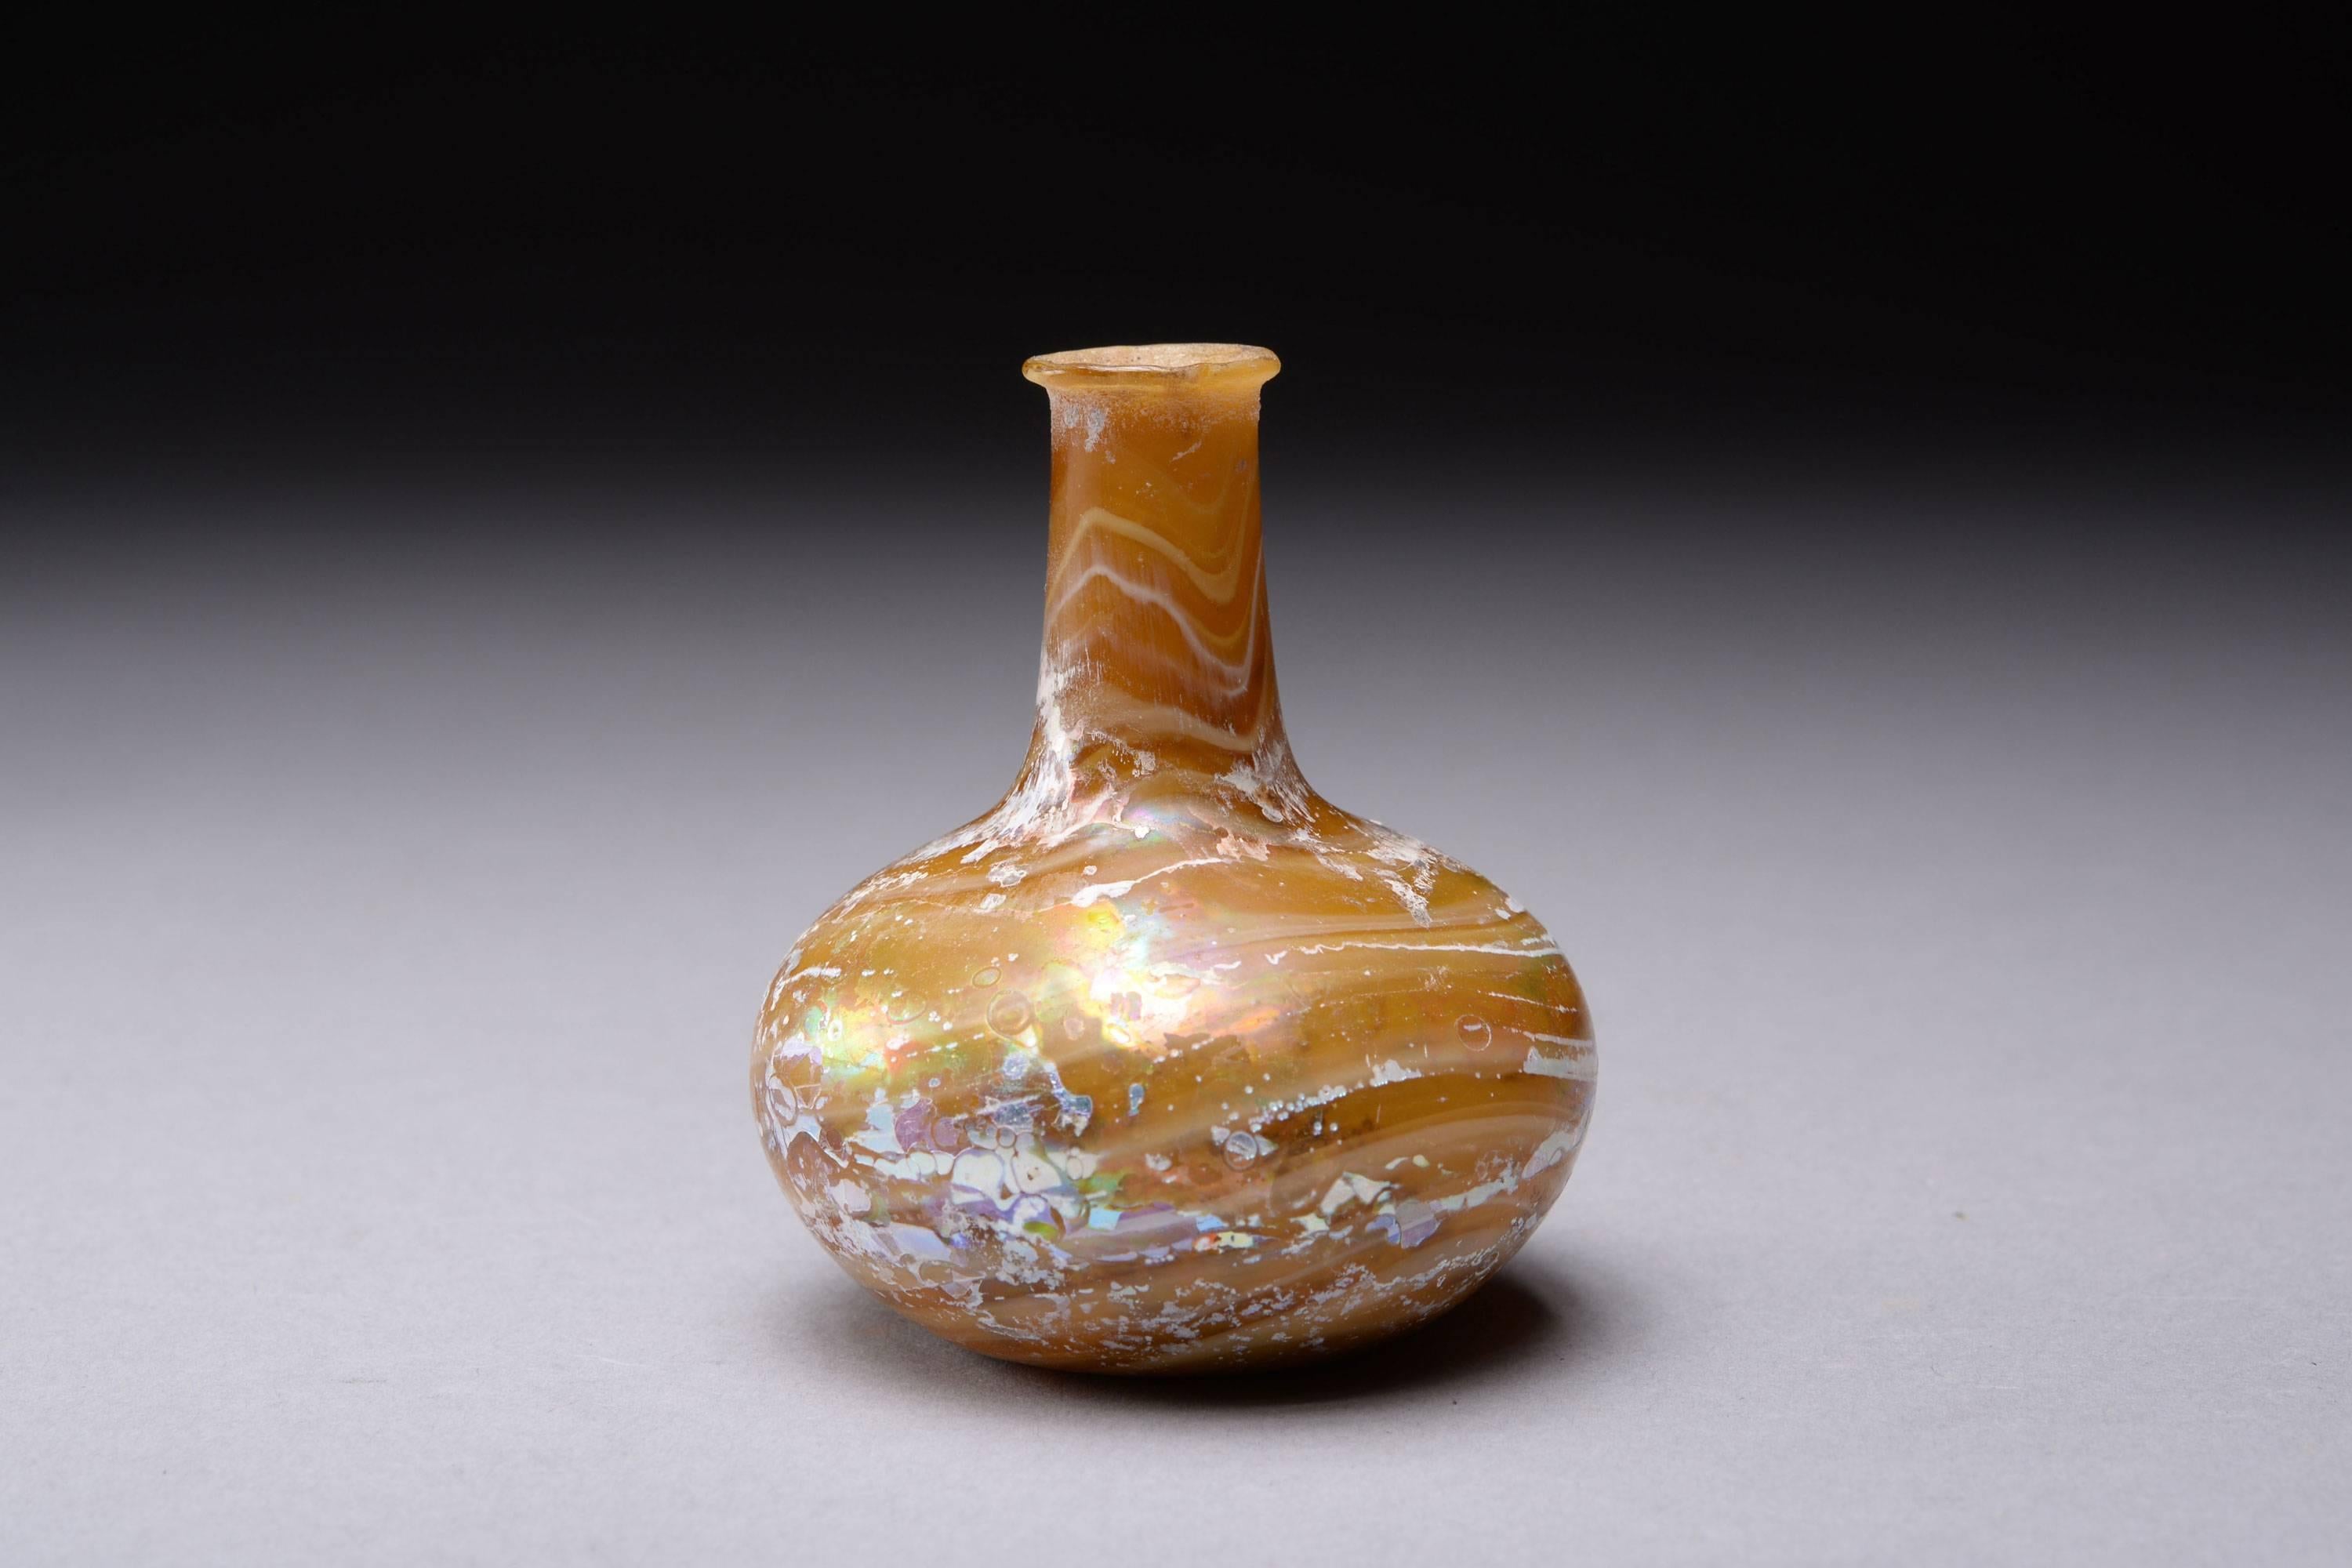 A stunning ancient Roman marbled glass bottle, dating to the early to mid-1st century AD.

This exquisite little bottle is beautifully composed, the elegant neck and squat body melt seamlessly together to form a vessel of pure elegance. The